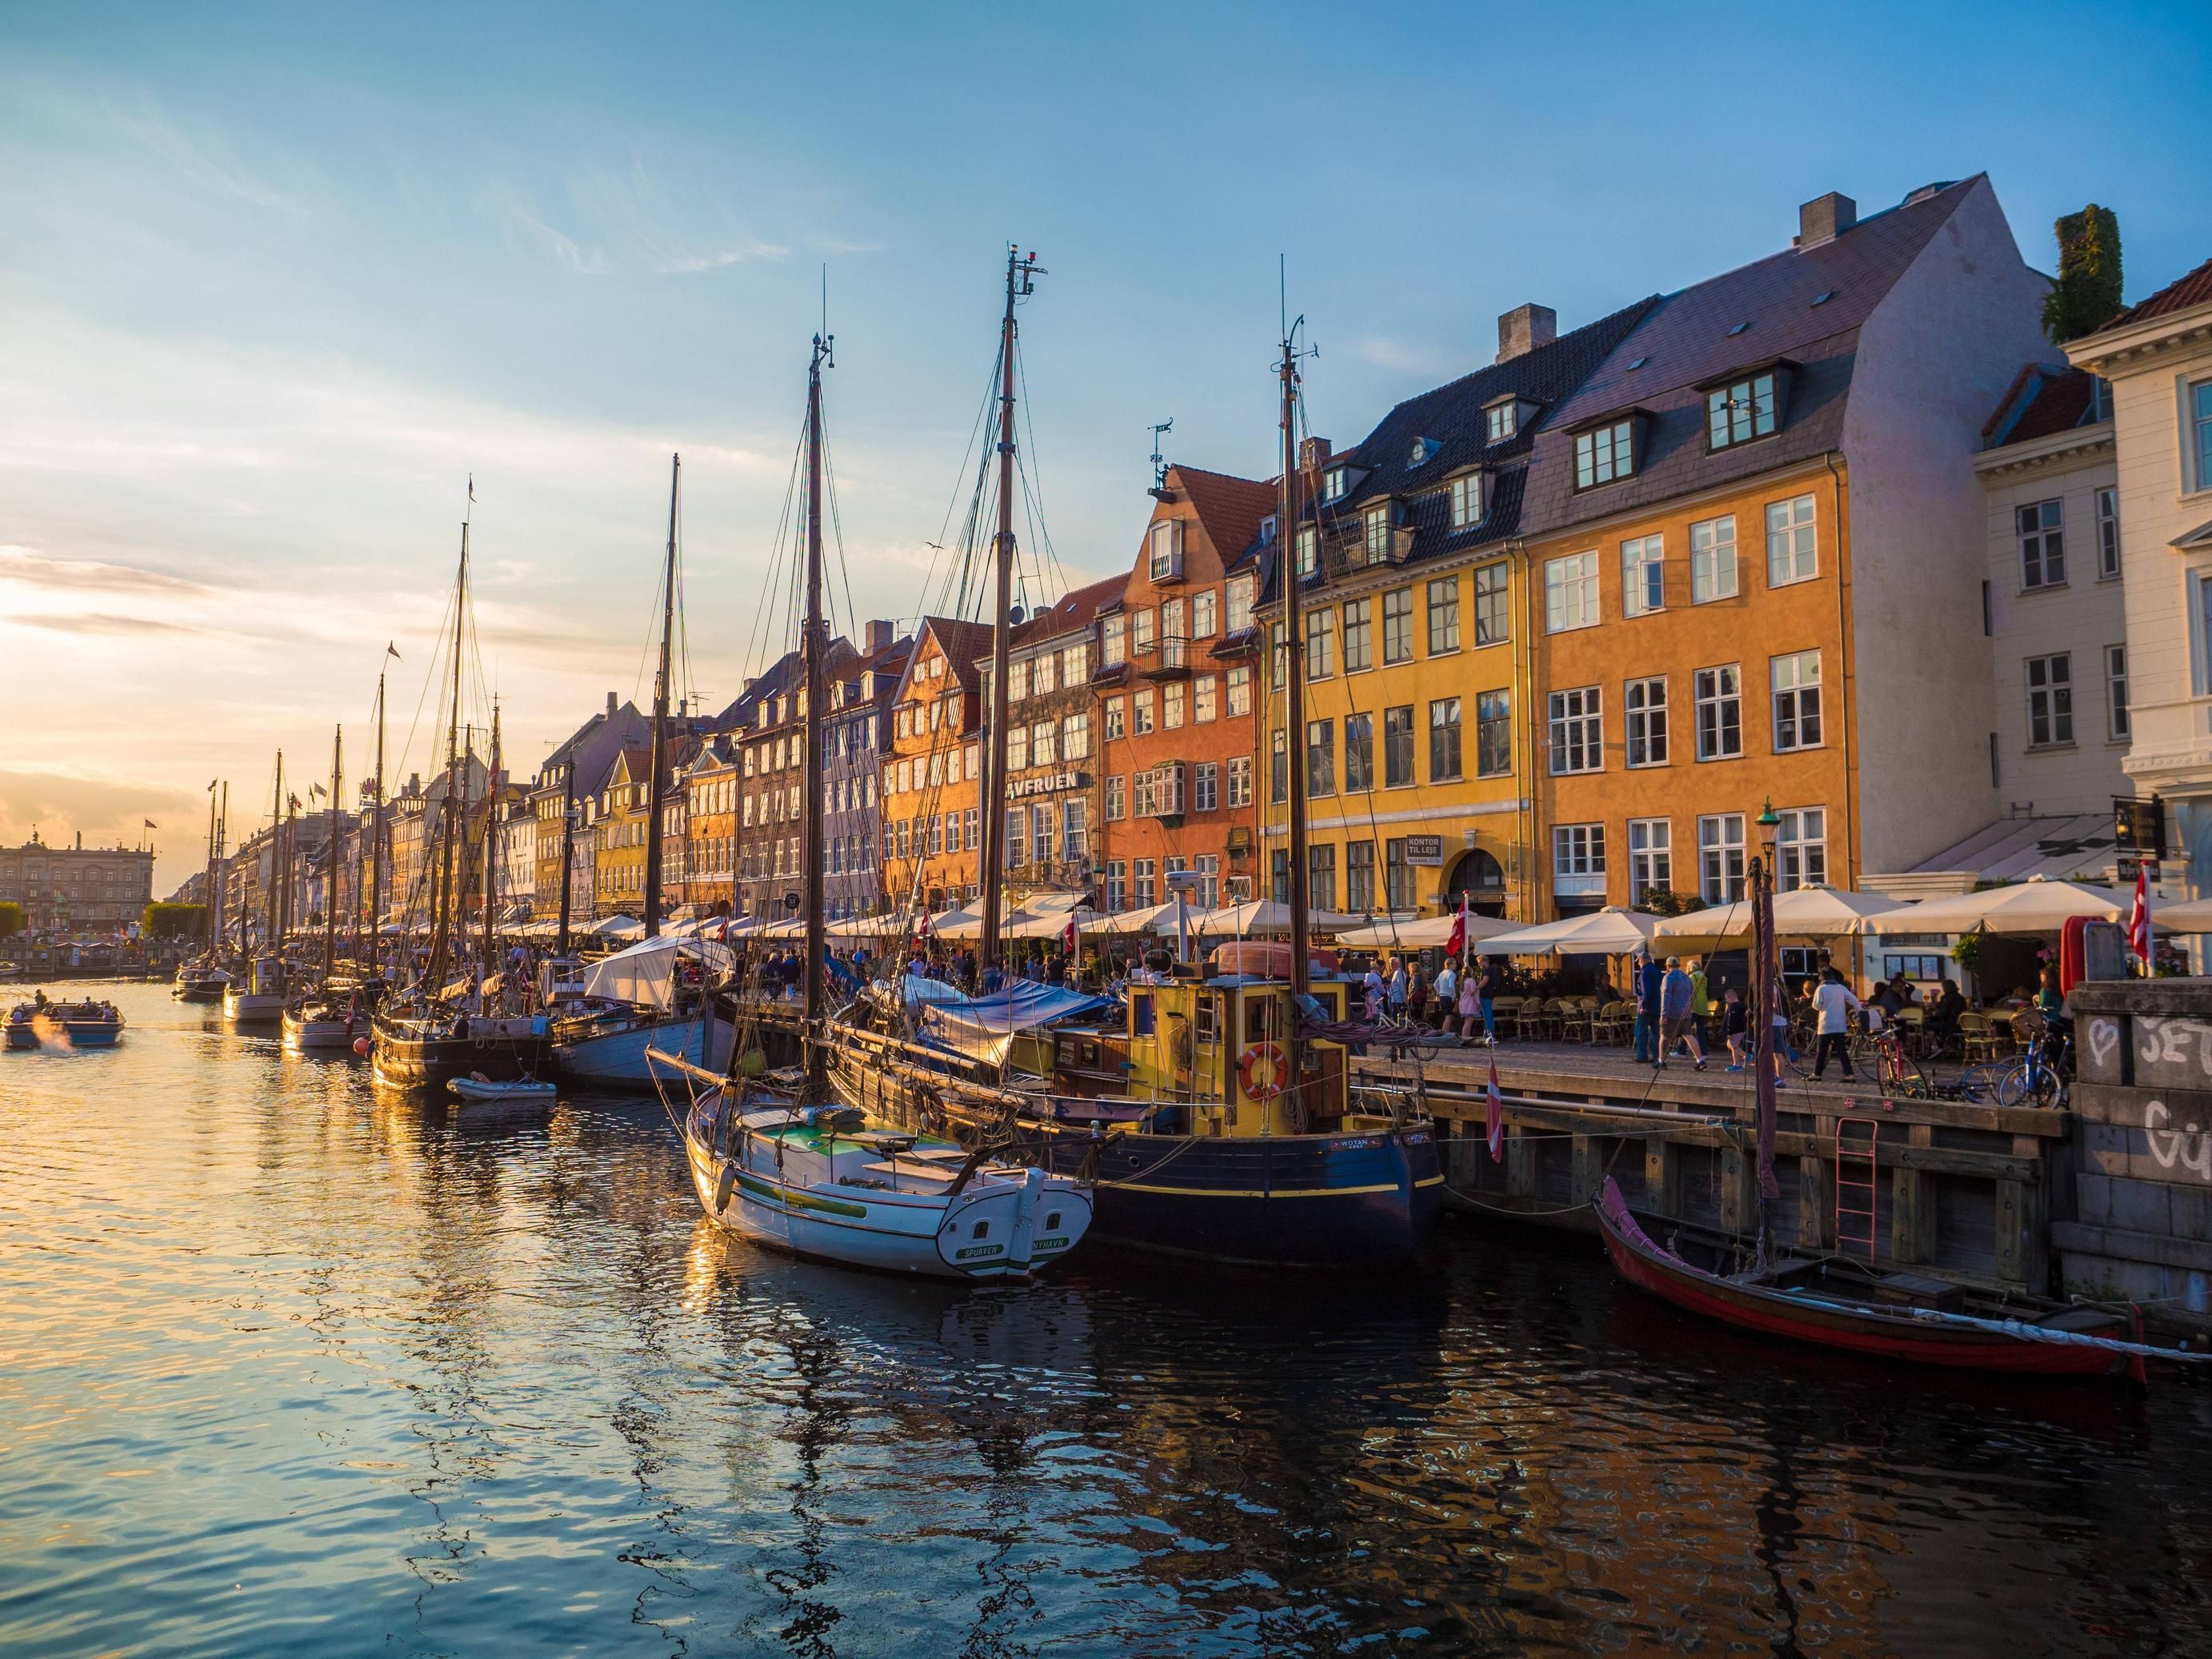 Sunset at Nyhavn, a beautiful waterfront district in Copenhagen ...